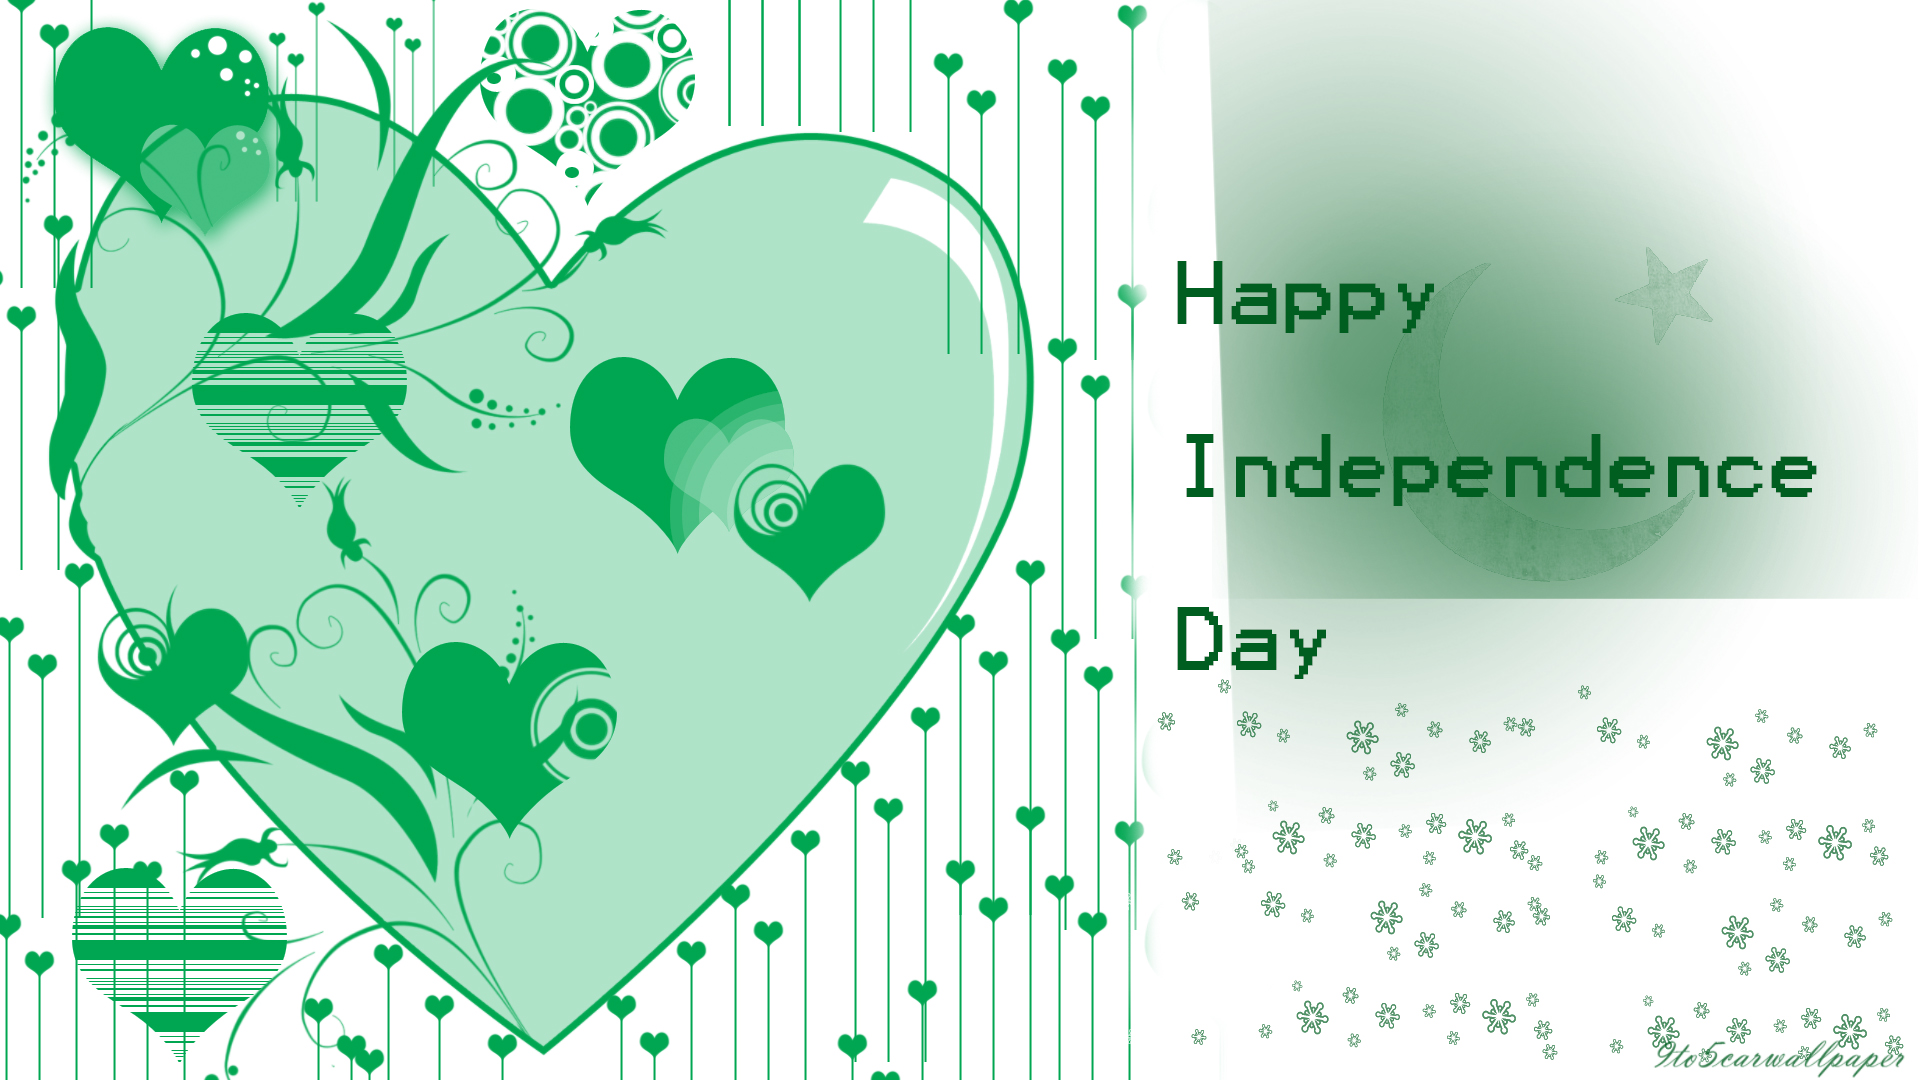 Happy Independence Day Pakistan 2017 - HD Wallpaper 